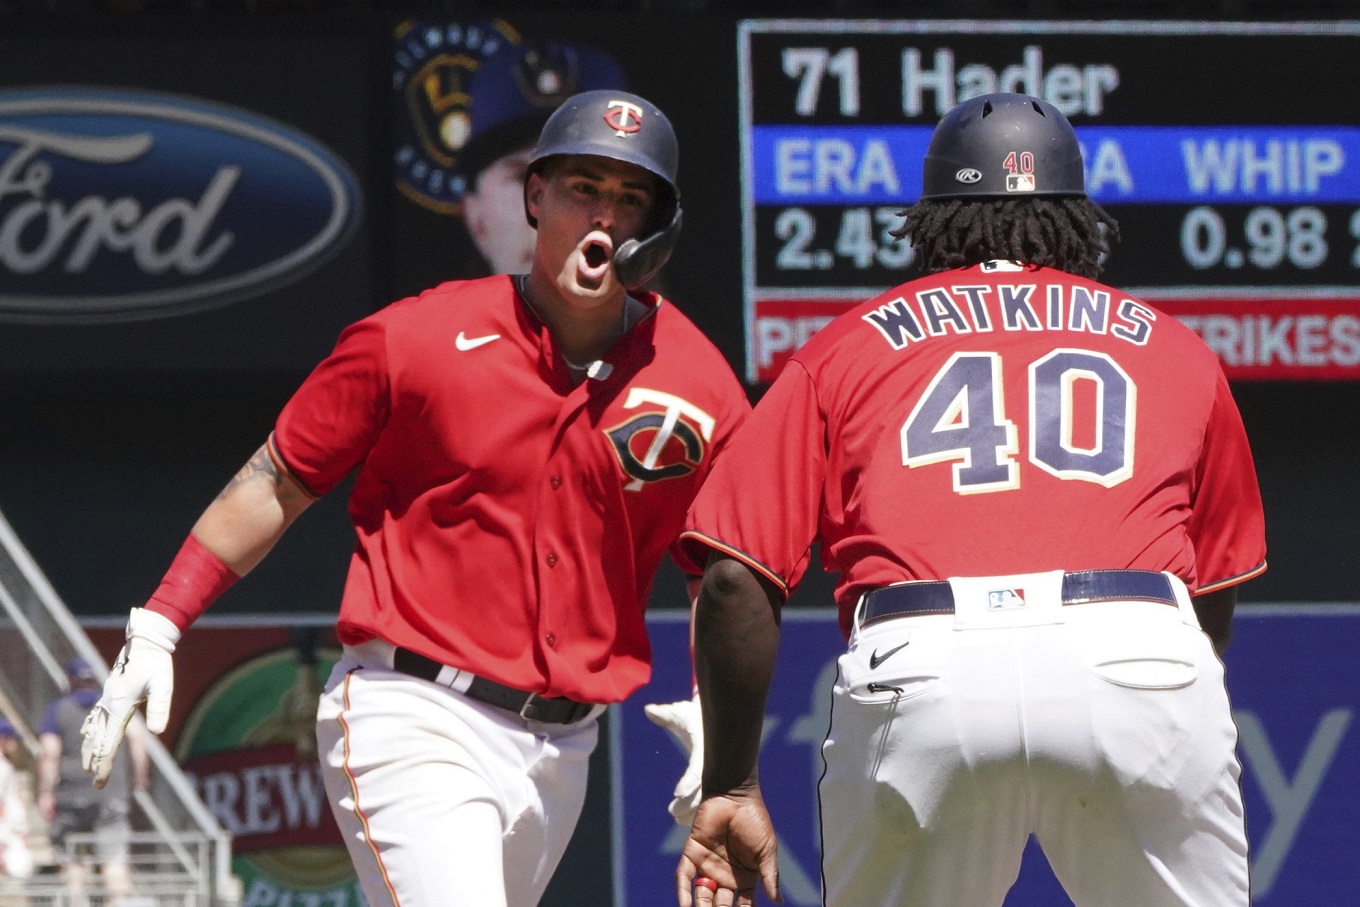 Miranda HR gives Twins walk-off, 4-1 win against Brewers